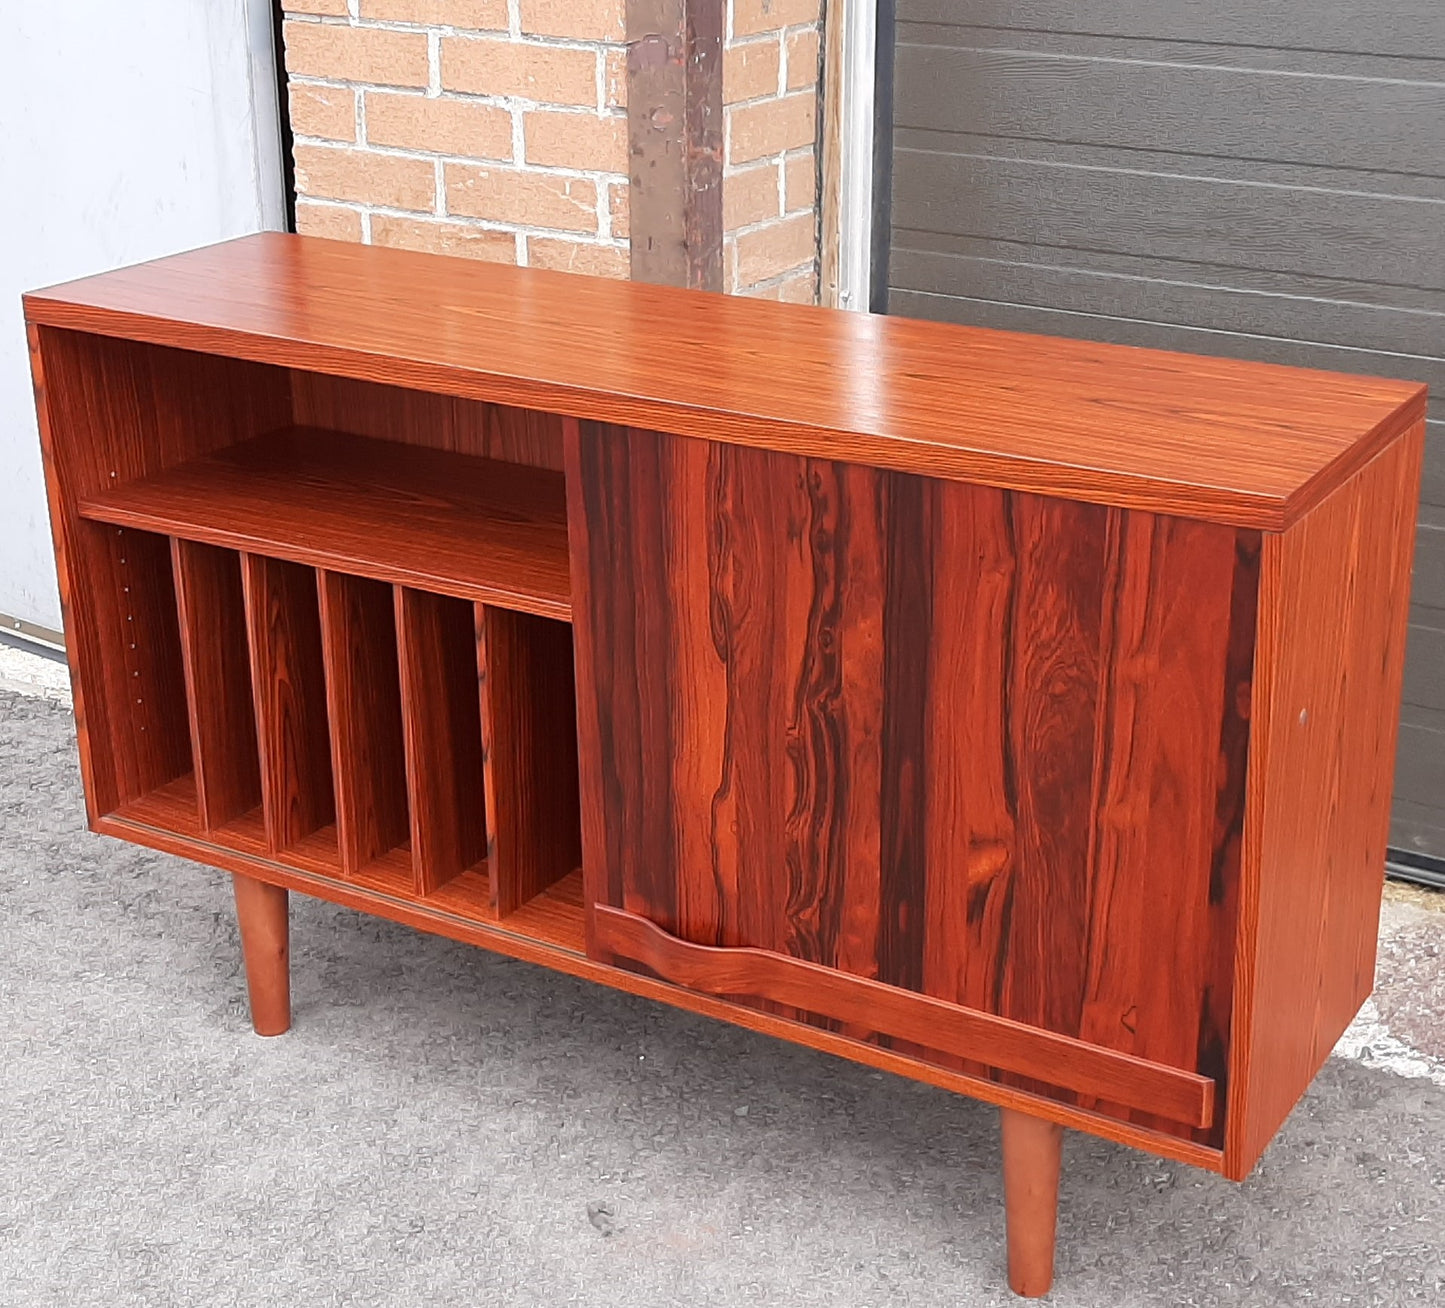 REFINISHED Swedish MCM Rosewood record credenza with a sliding door by Troeds 51"